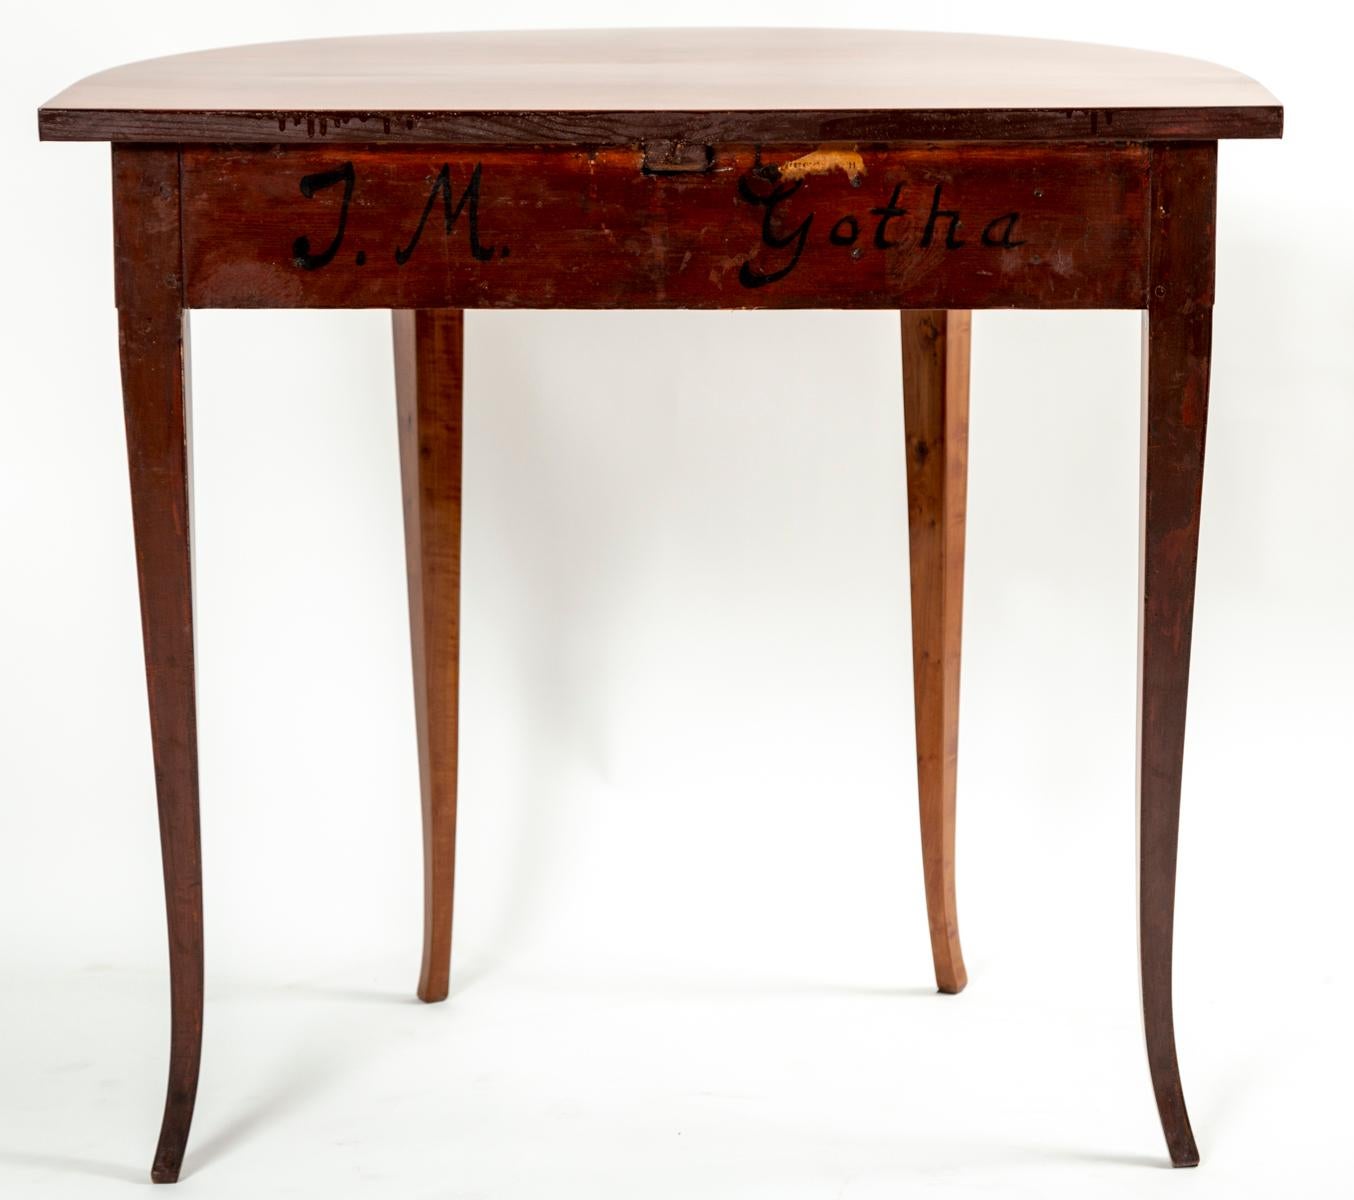 Early 19th Century Biedermeier Demilune Pearwood Console For Sale 1